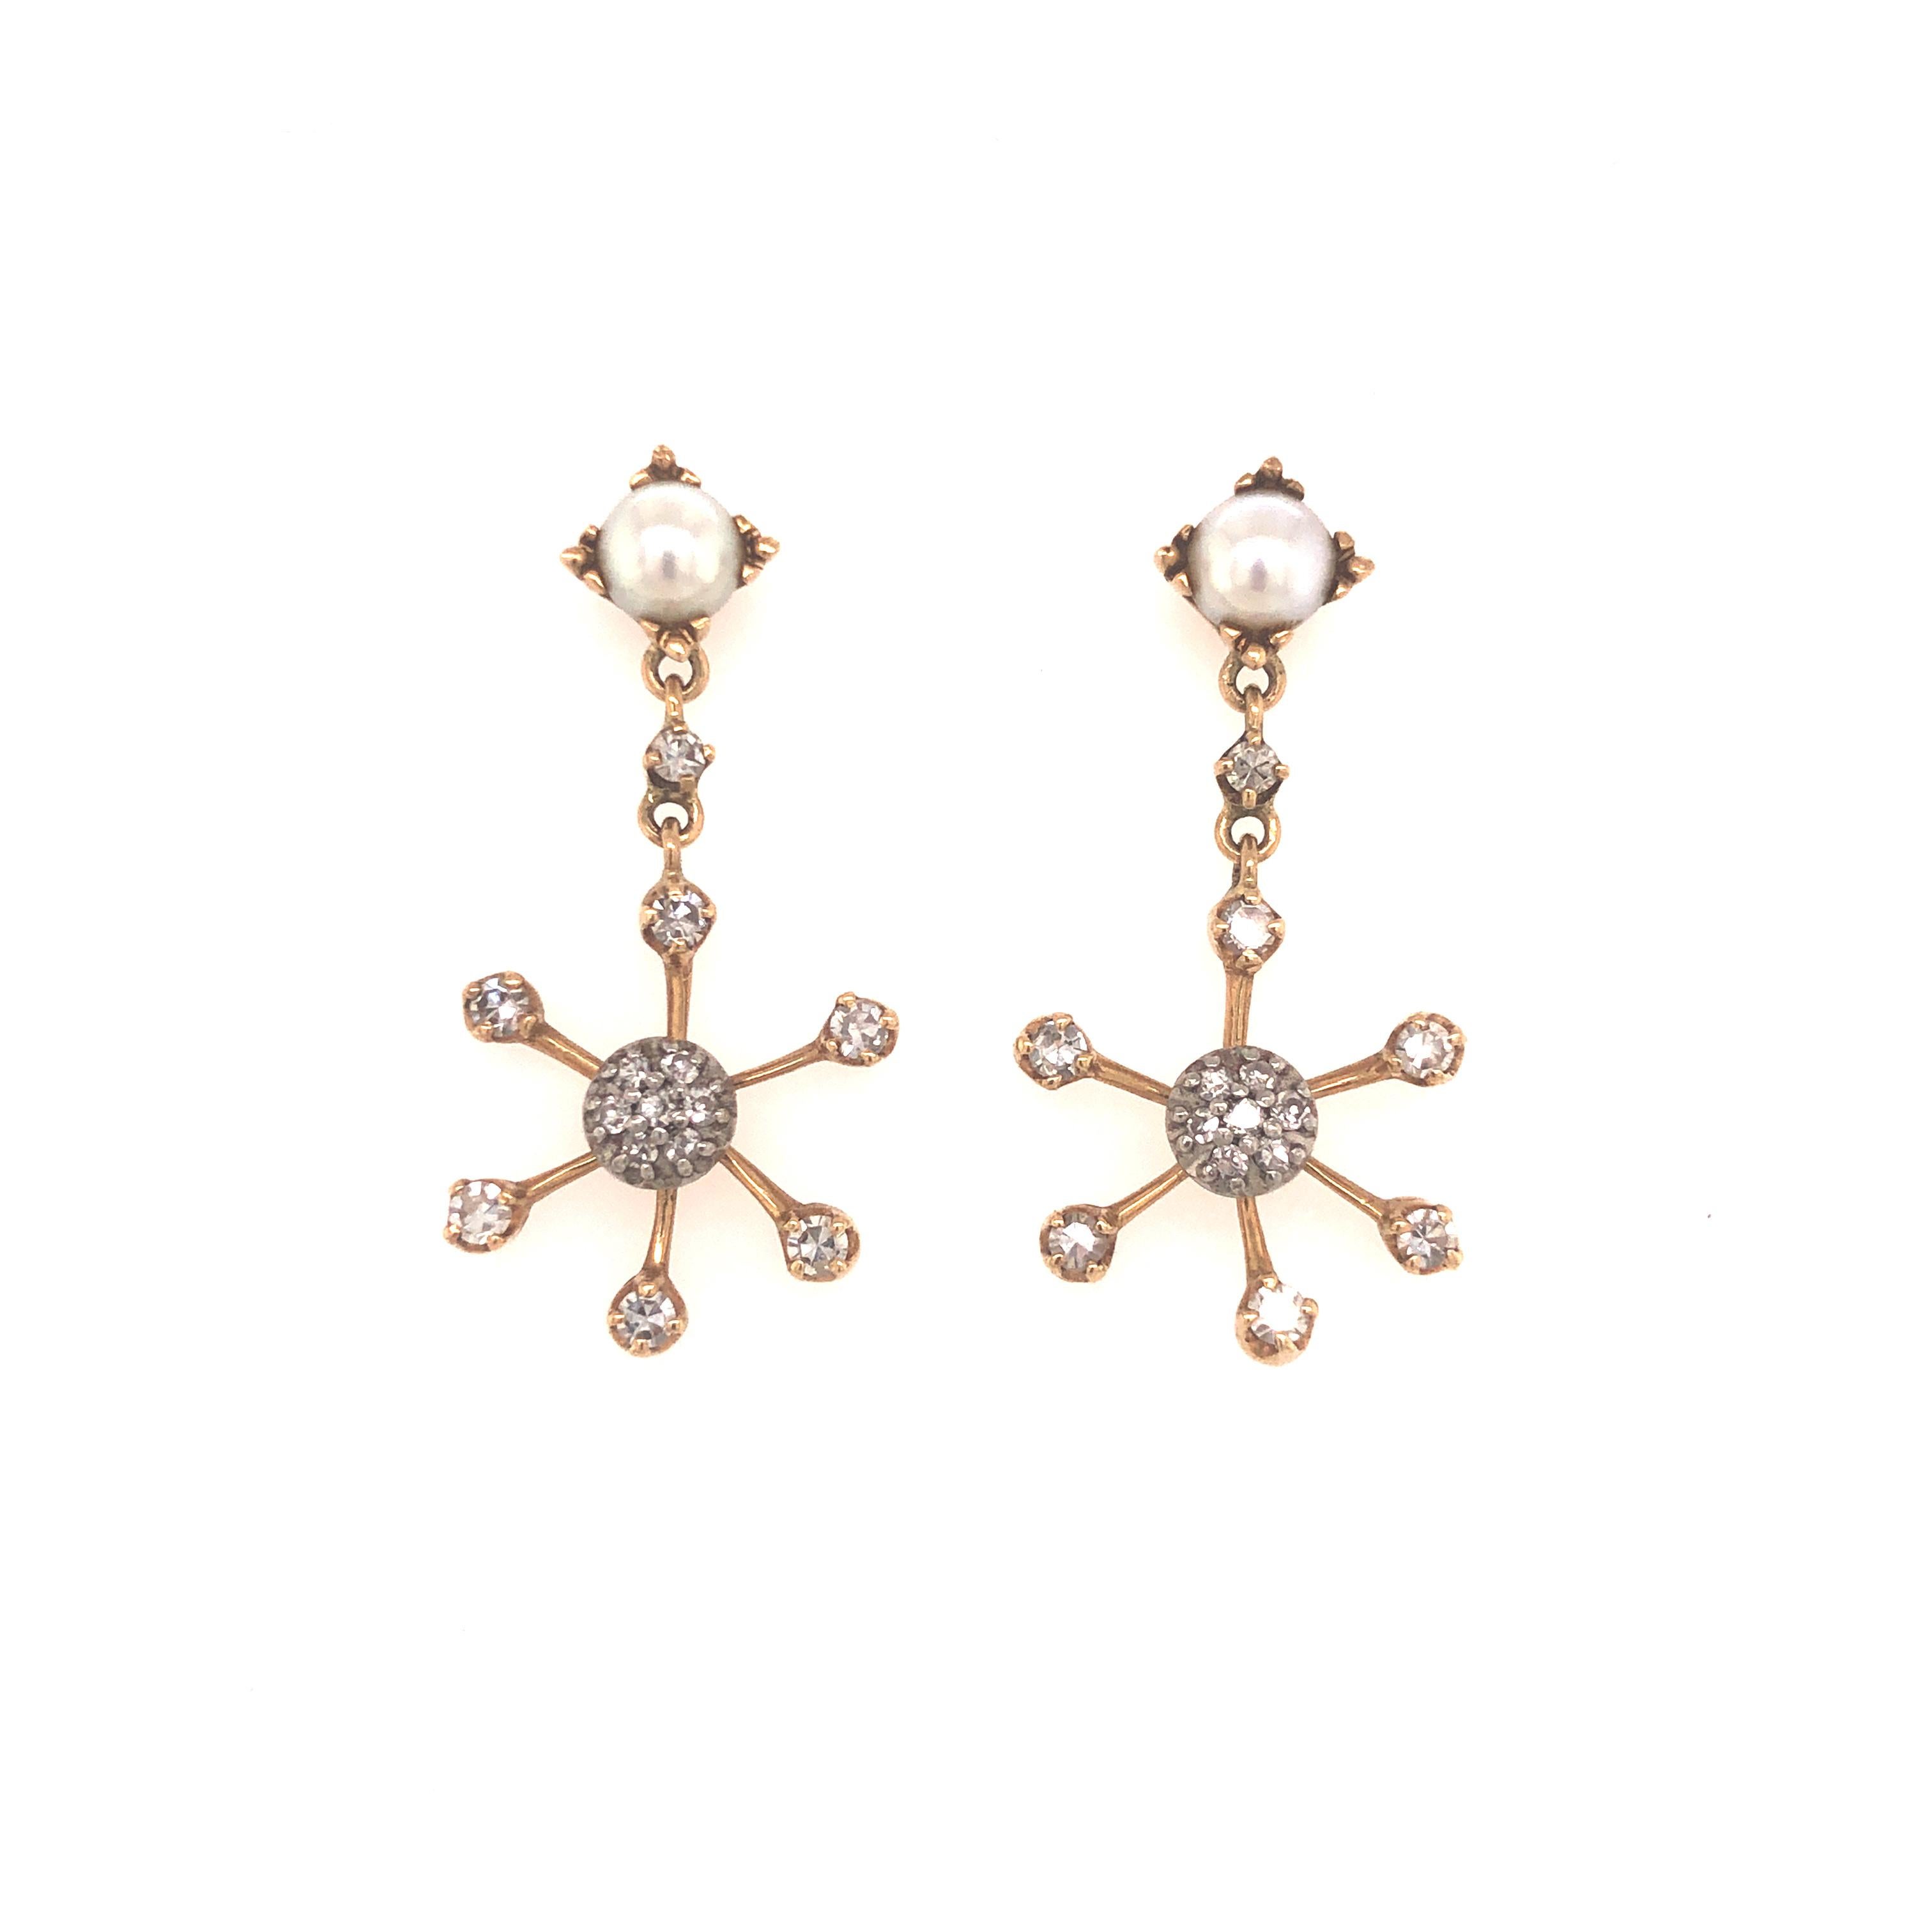 Beautifully crafted vintage earrings crafted in 14k yellow gold. The earrings depict a snowflake design or also known as starburst. The earrings are set with a pearl stud secured with a screw back post. Dangling from the pearl is the snowflake